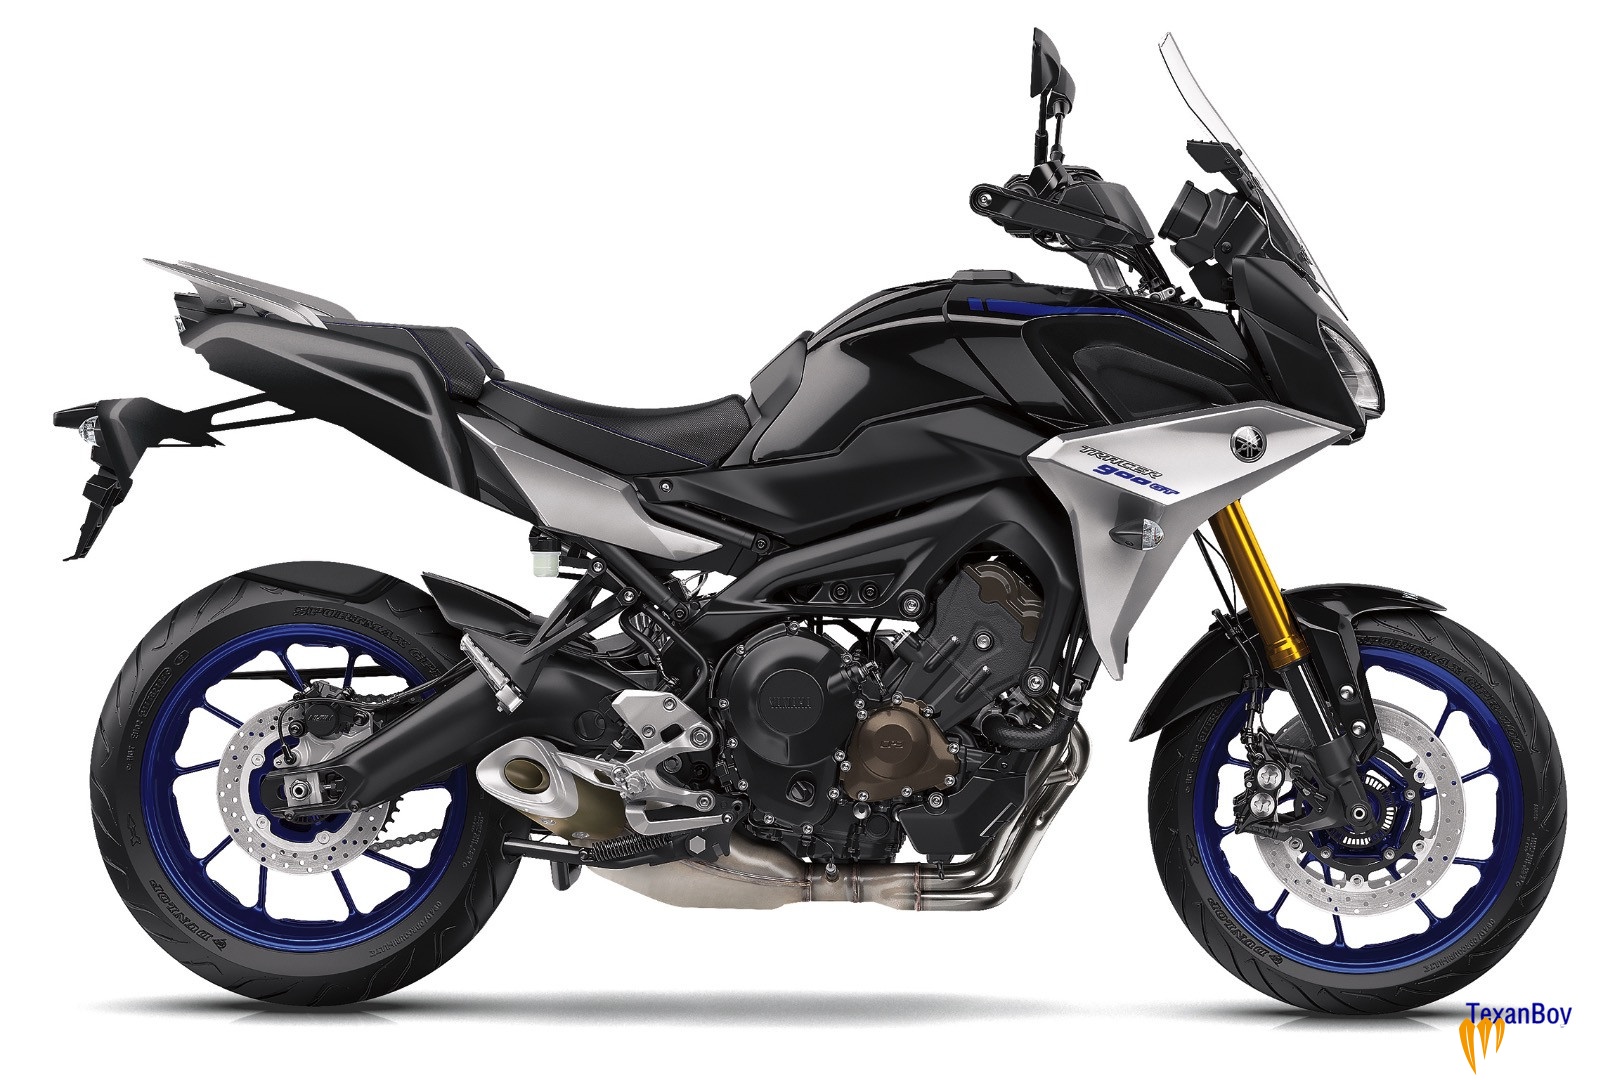 2019-Yamaha-Tracer-900-GT-First-Look-sport-touring-motorcycle-4.jpg